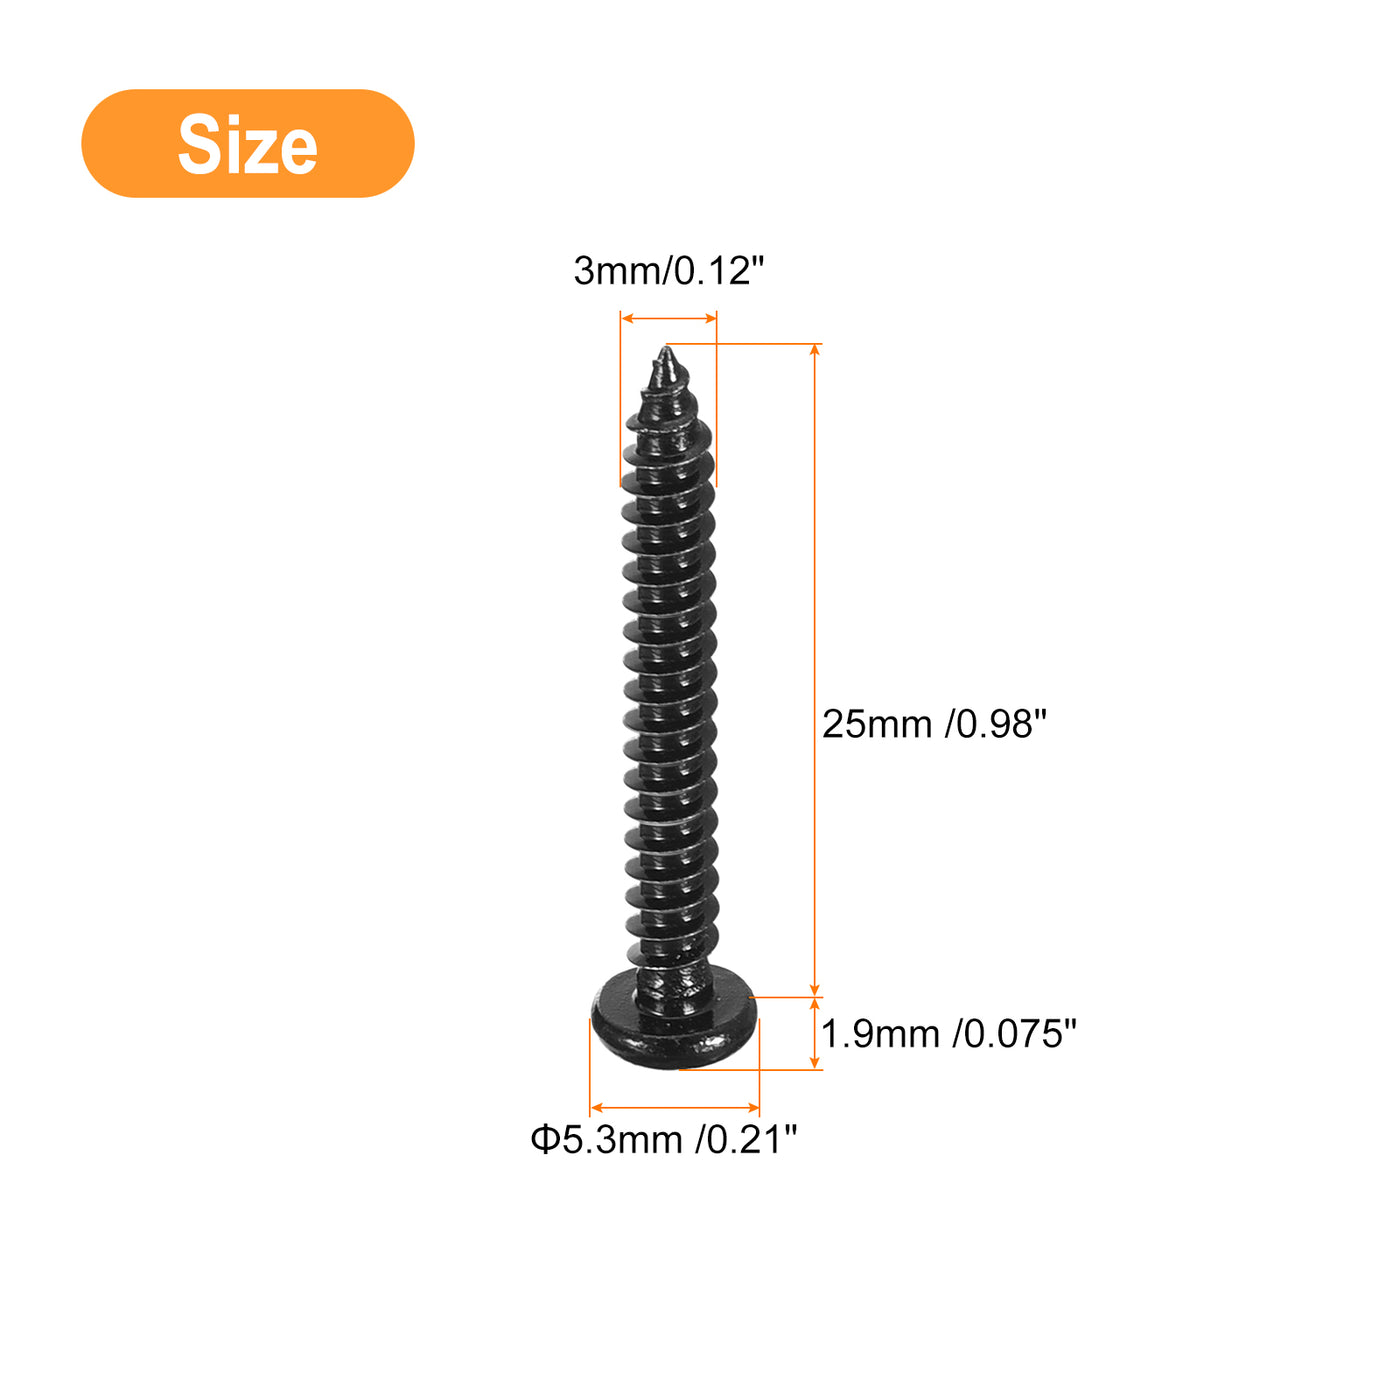 uxcell Uxcell 3mm x 25mm Phillips Pan Head Self-tapping Screw, 100pcs - 304 Stainless Steel Round Head Wood Screw Full Thread (Black)